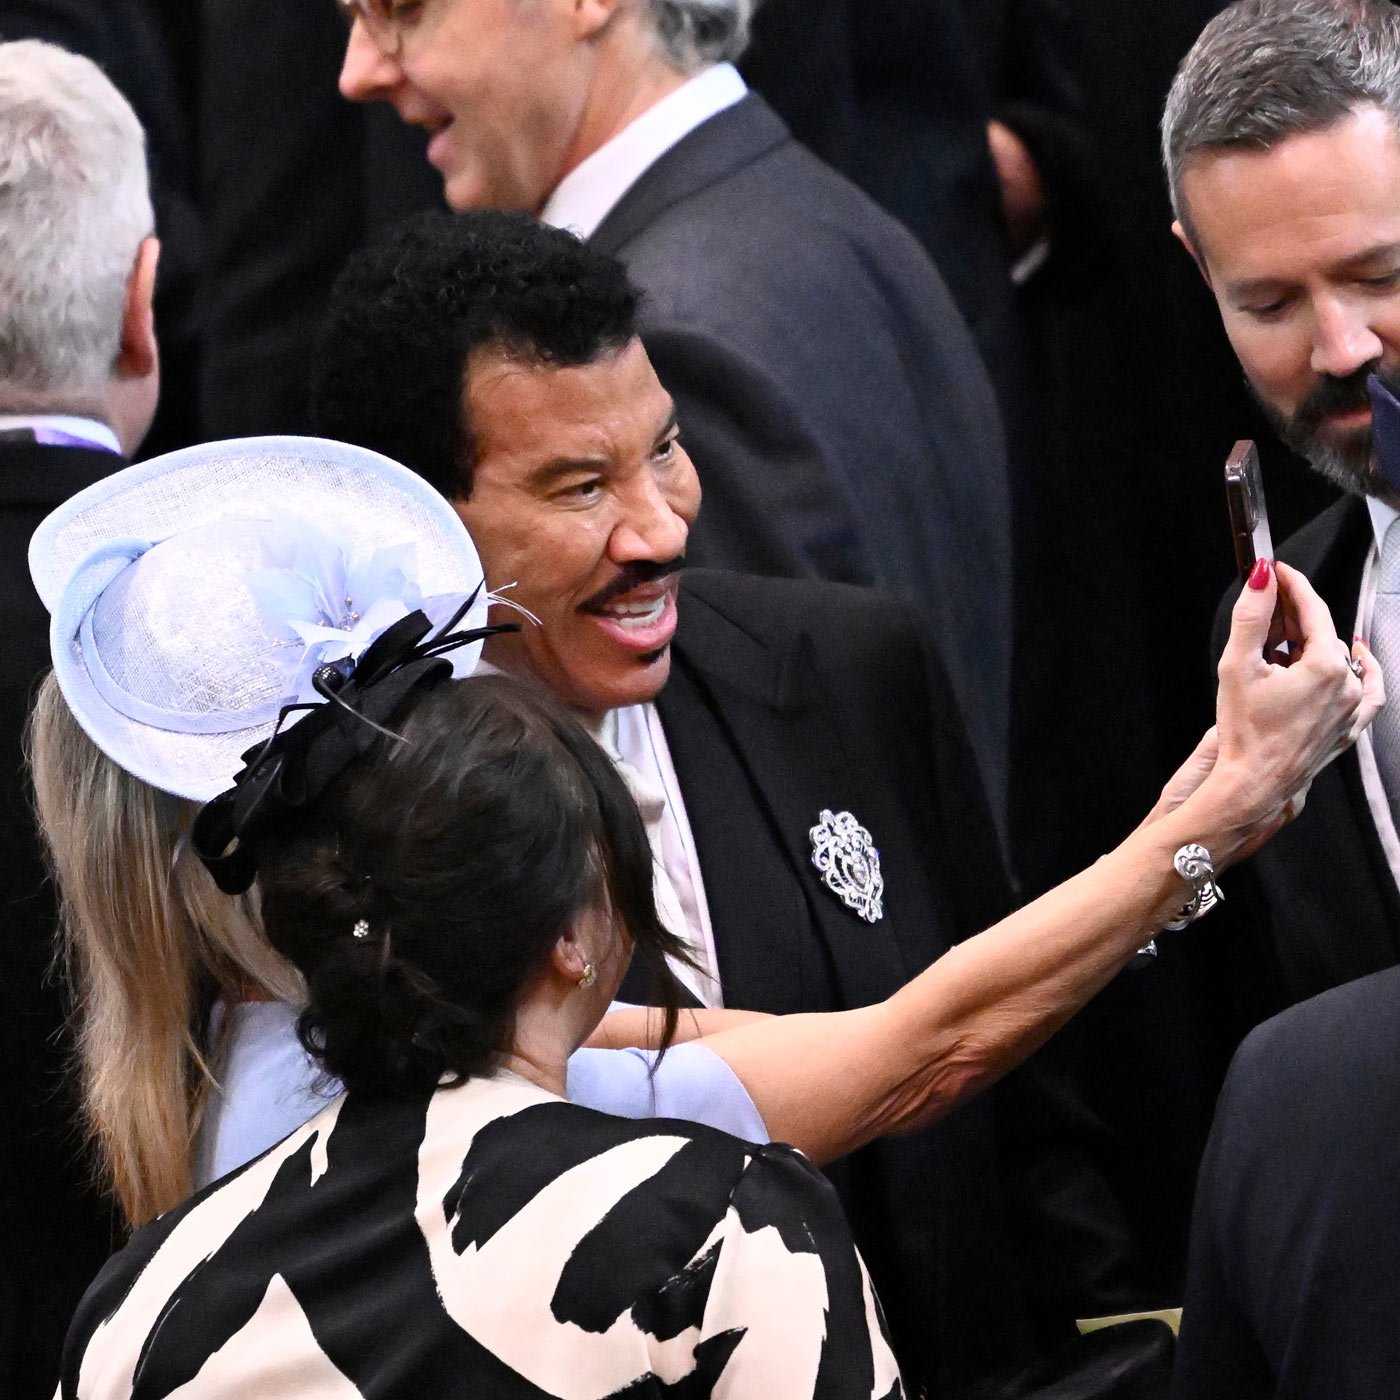 US pop star Lionel Richie arriving at Westminster Abbey